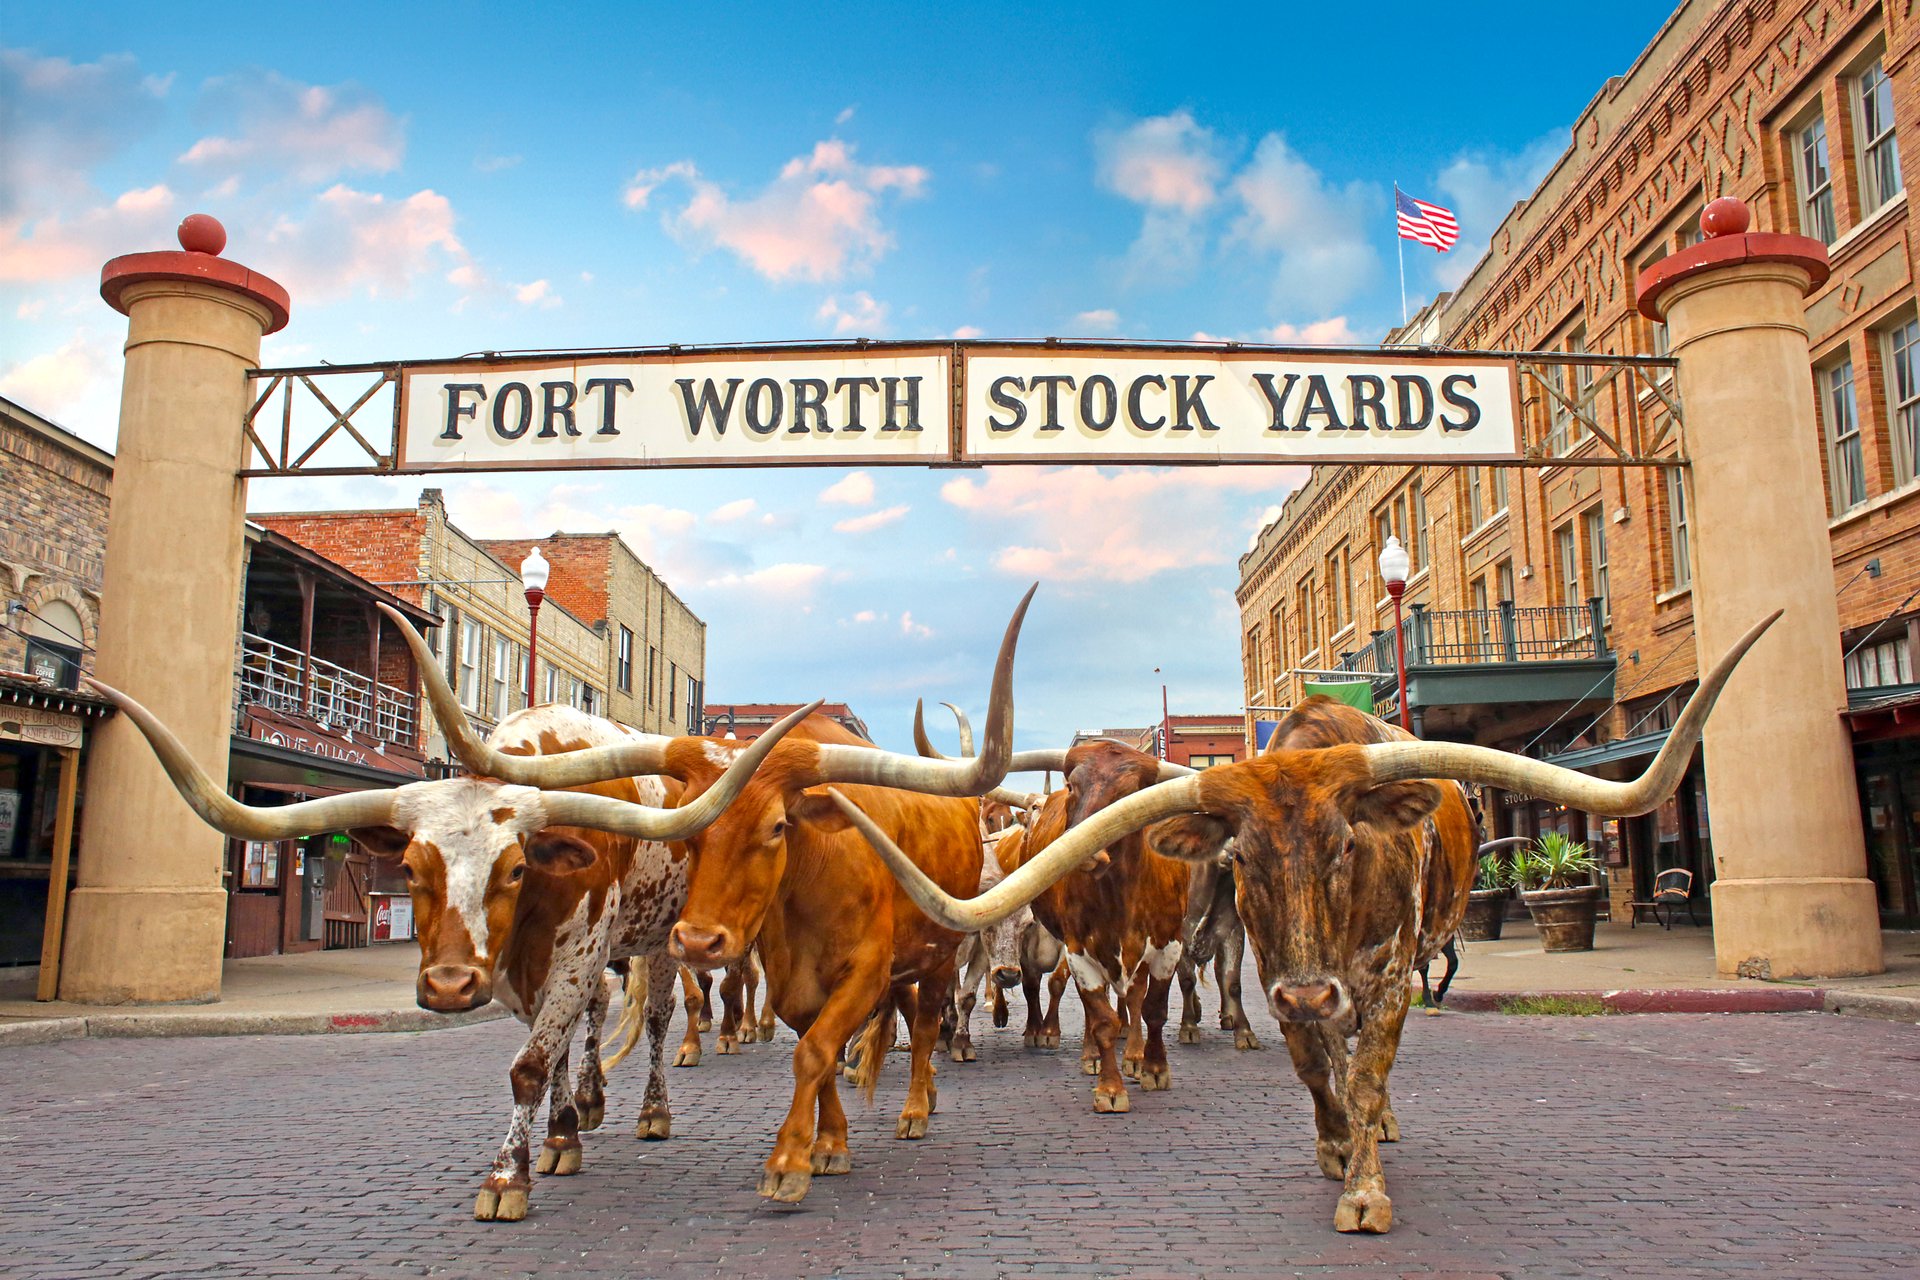 Longhorns walk down the street of the Fort Worth Stockyards